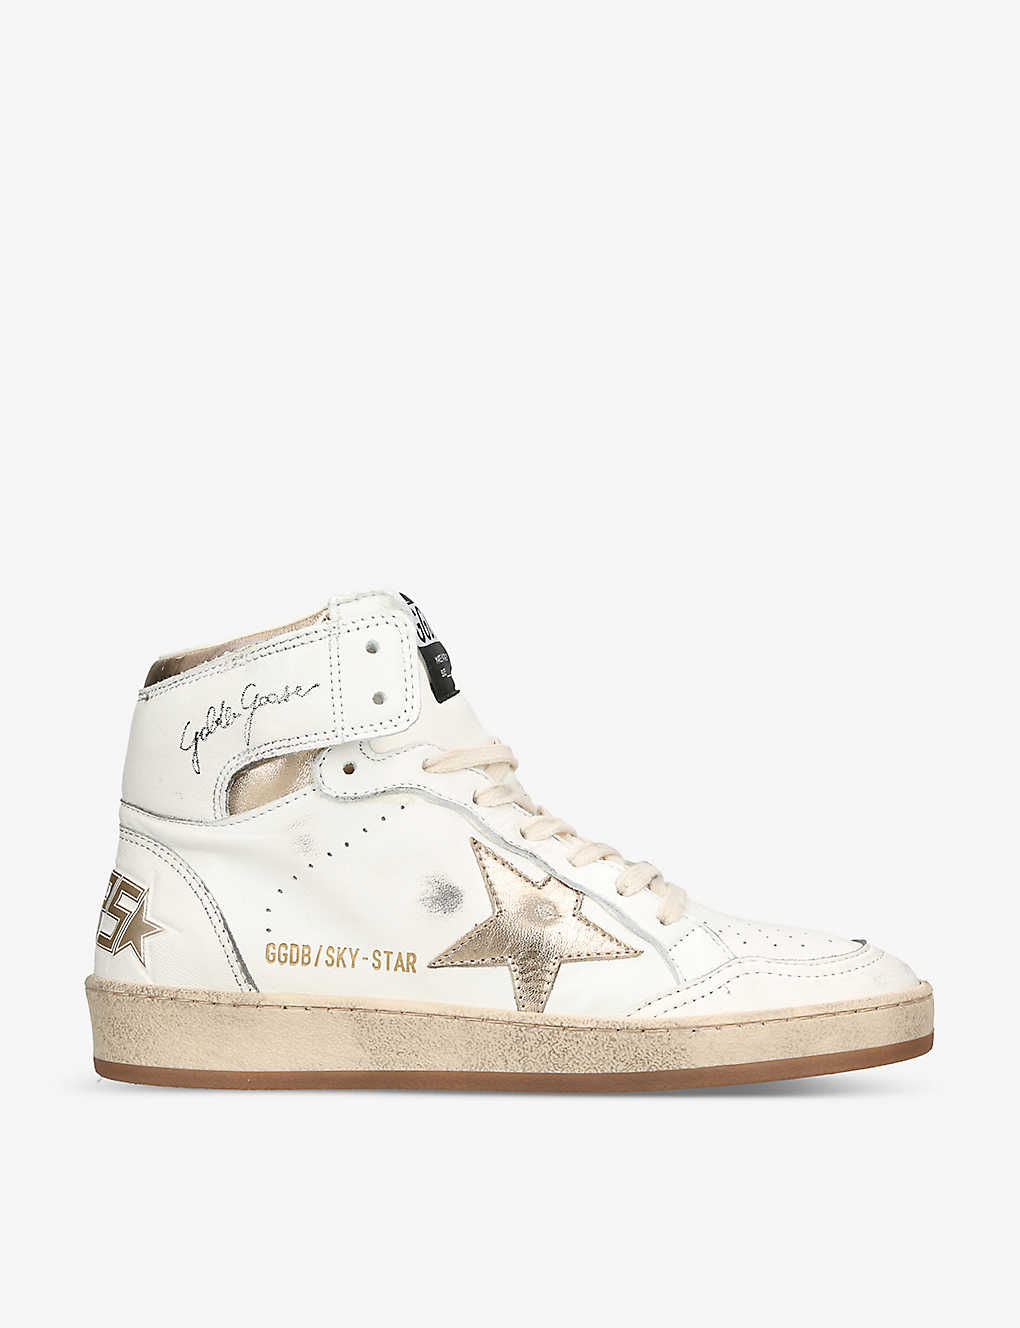 Golden Goose Women's Sky Star 11522 Leather High-top Trainers In White